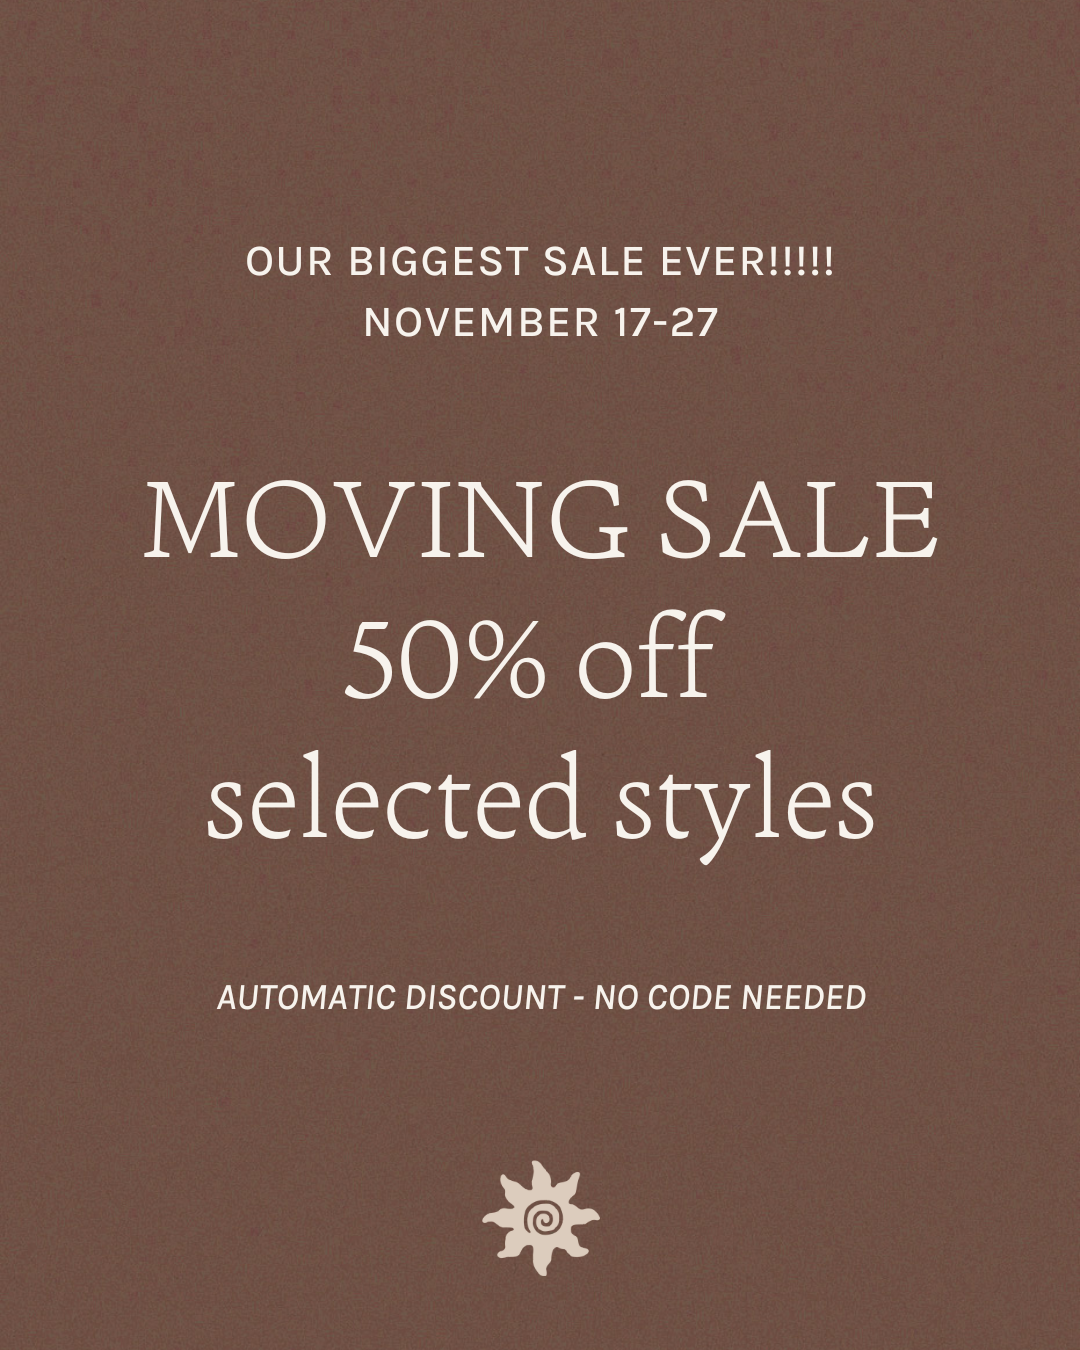 OUR BIGGEST SALE EVER 50% OFF